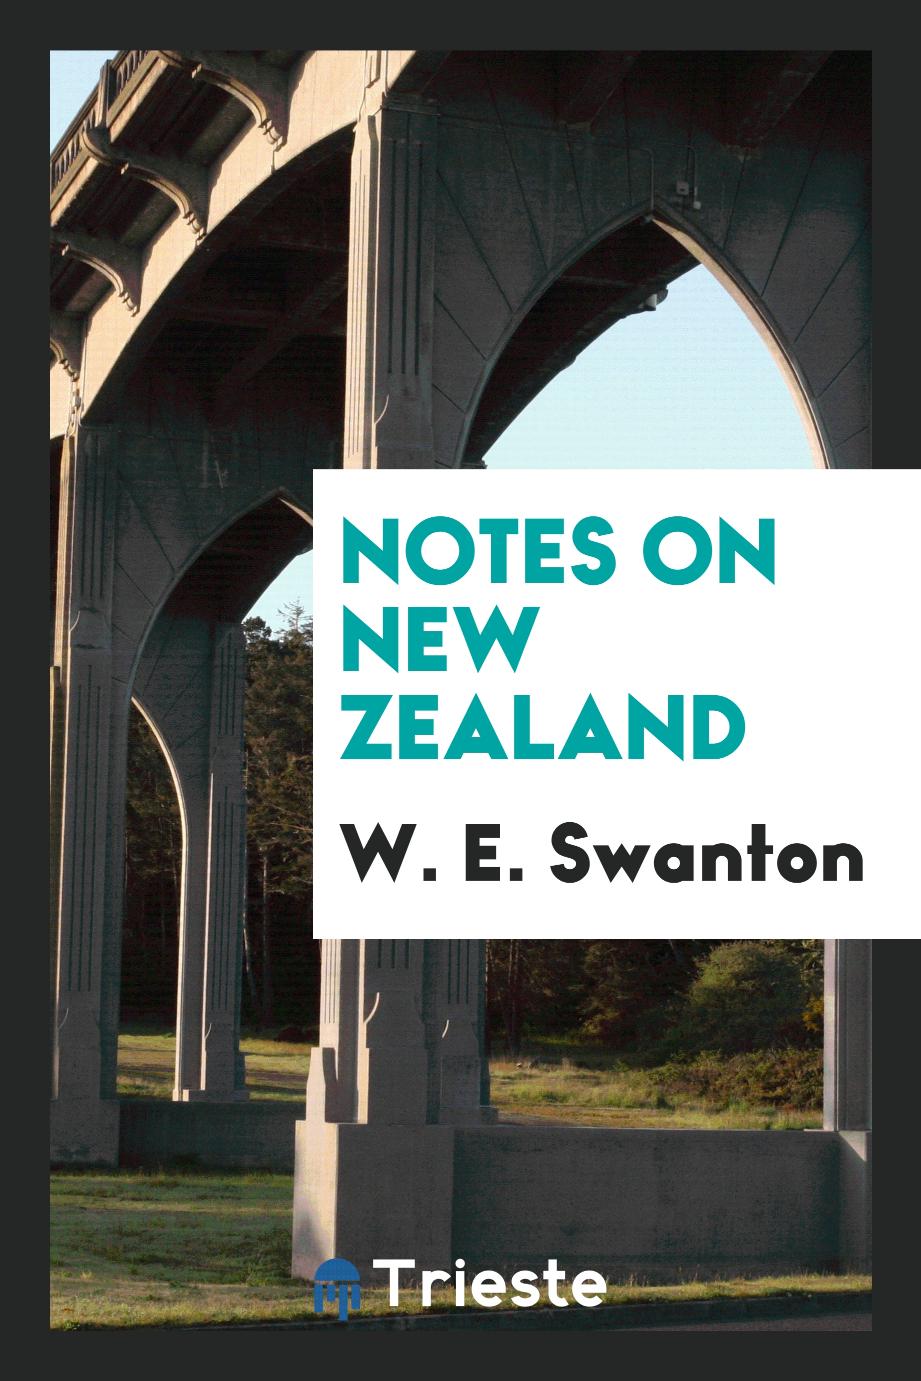 Notes on New Zealand